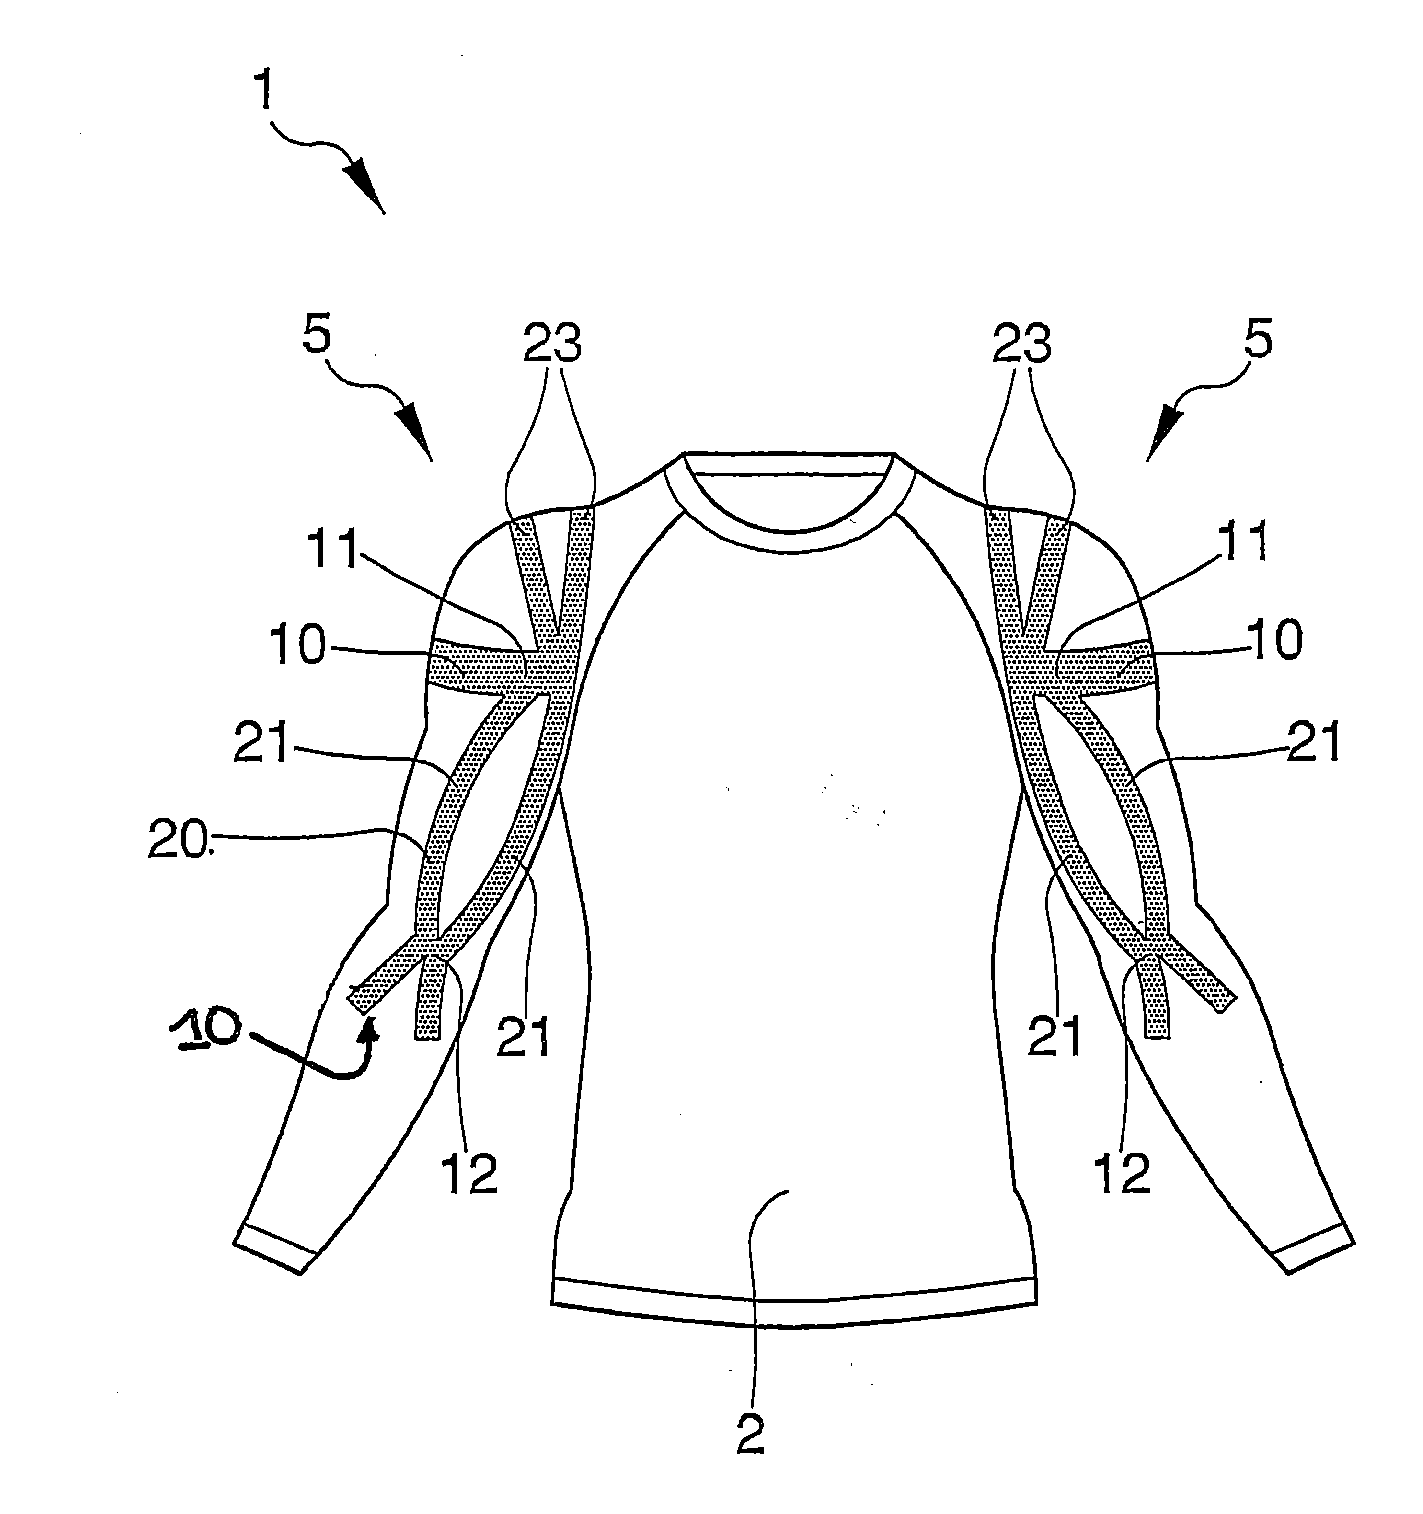 Garment for the neuro-musculo-skeletal assistance